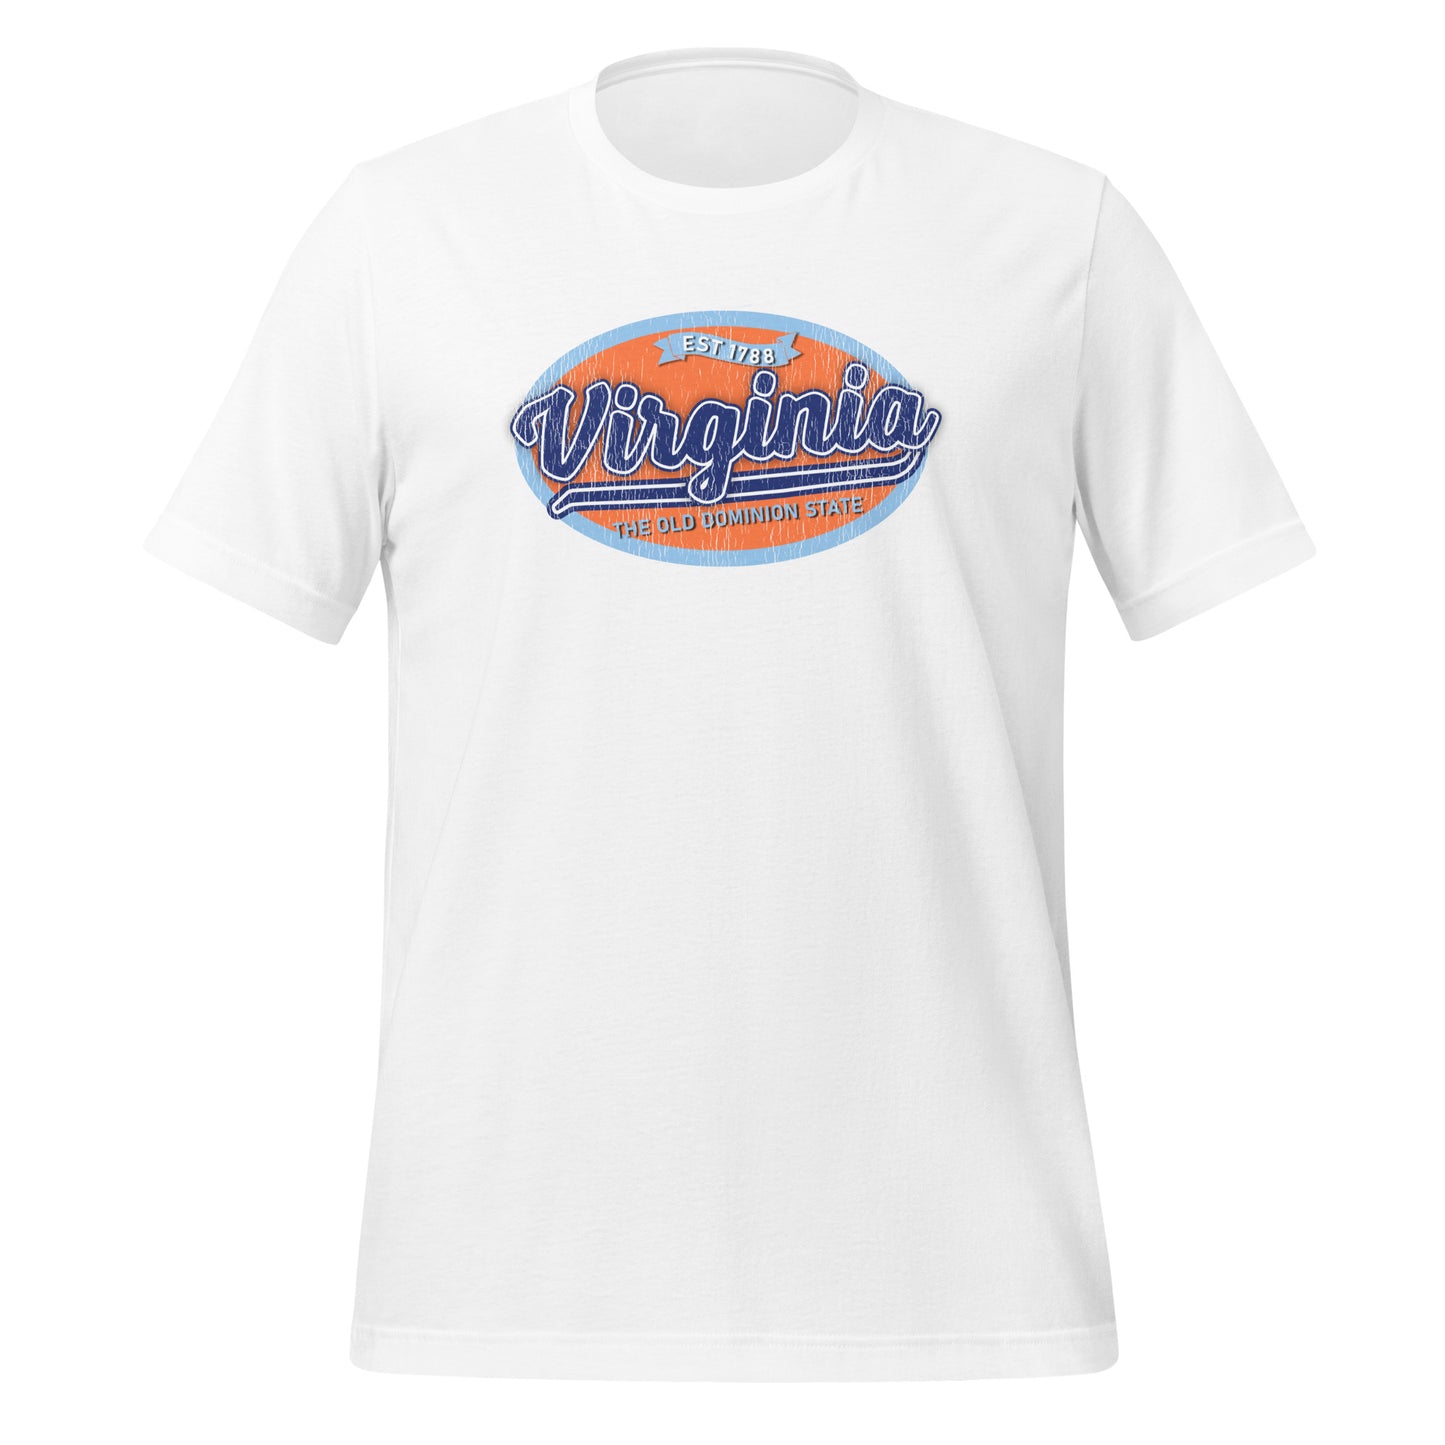 Virginia Old Dominion State T-Shirt